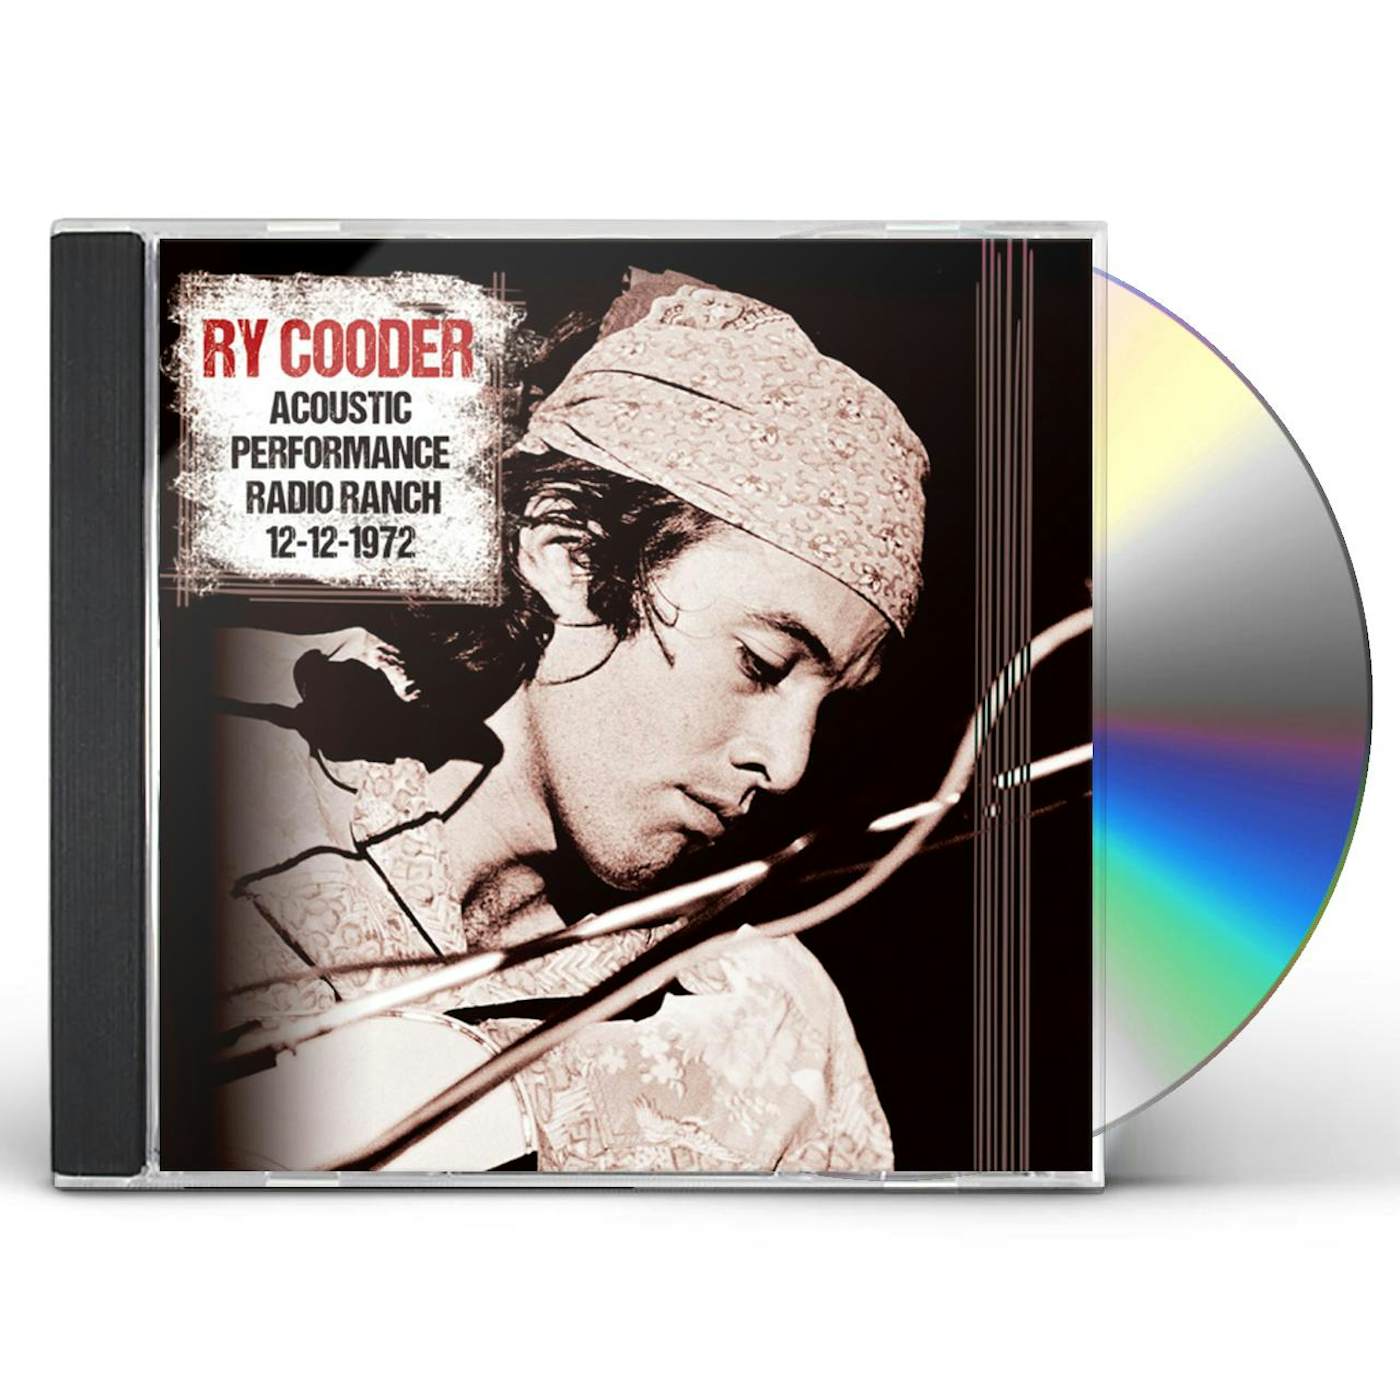 Ry Cooder ACOUSTIC PERFORMANCE RADIO RANCH 12TH DECEMBER CD